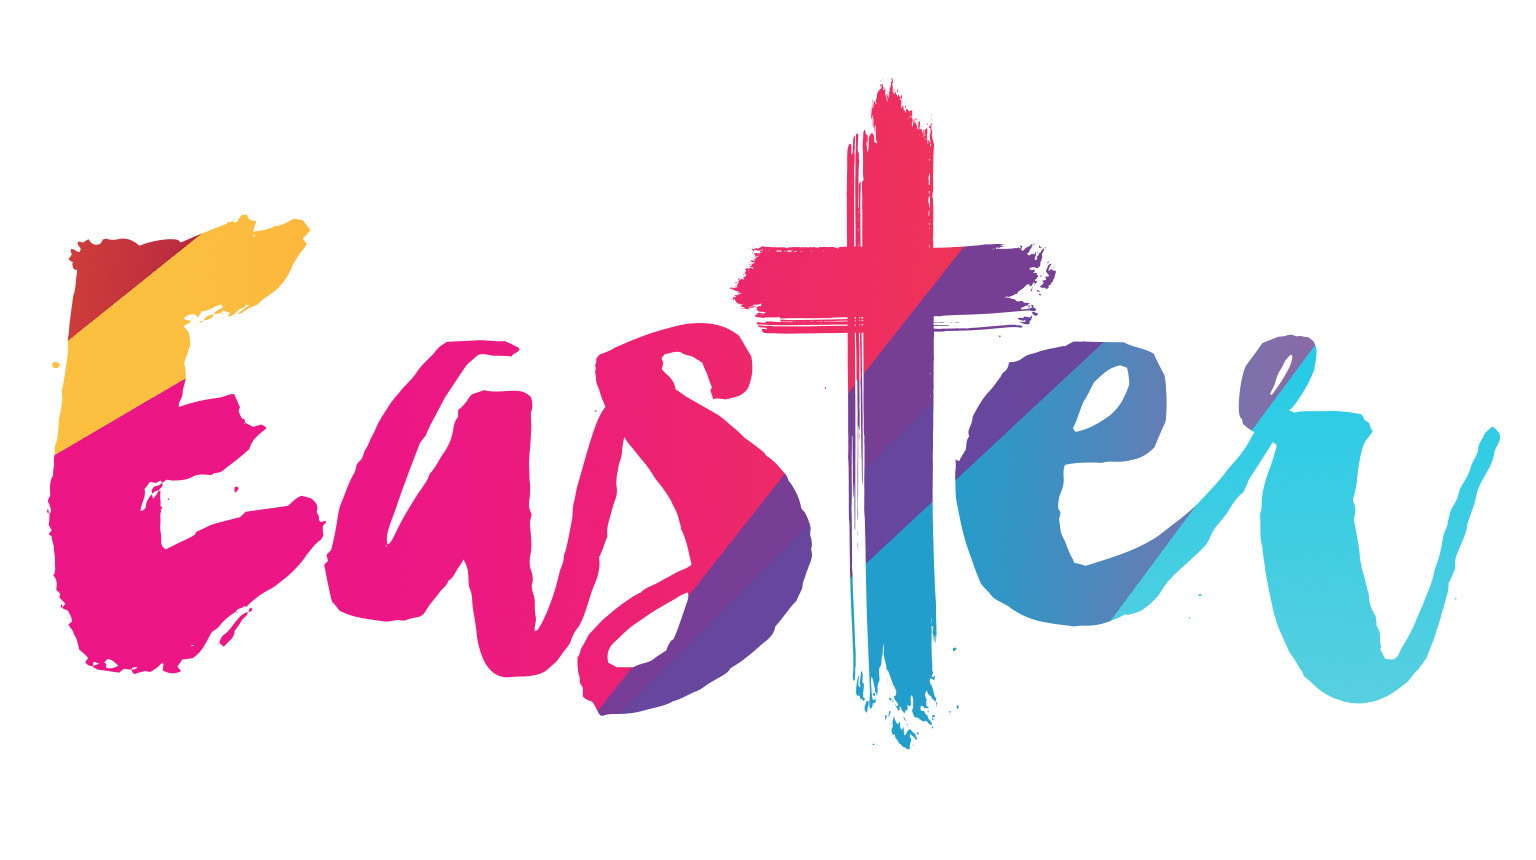 the word easter written in a script font with pastel colors filling the text. instead of the letter t there is a cross.